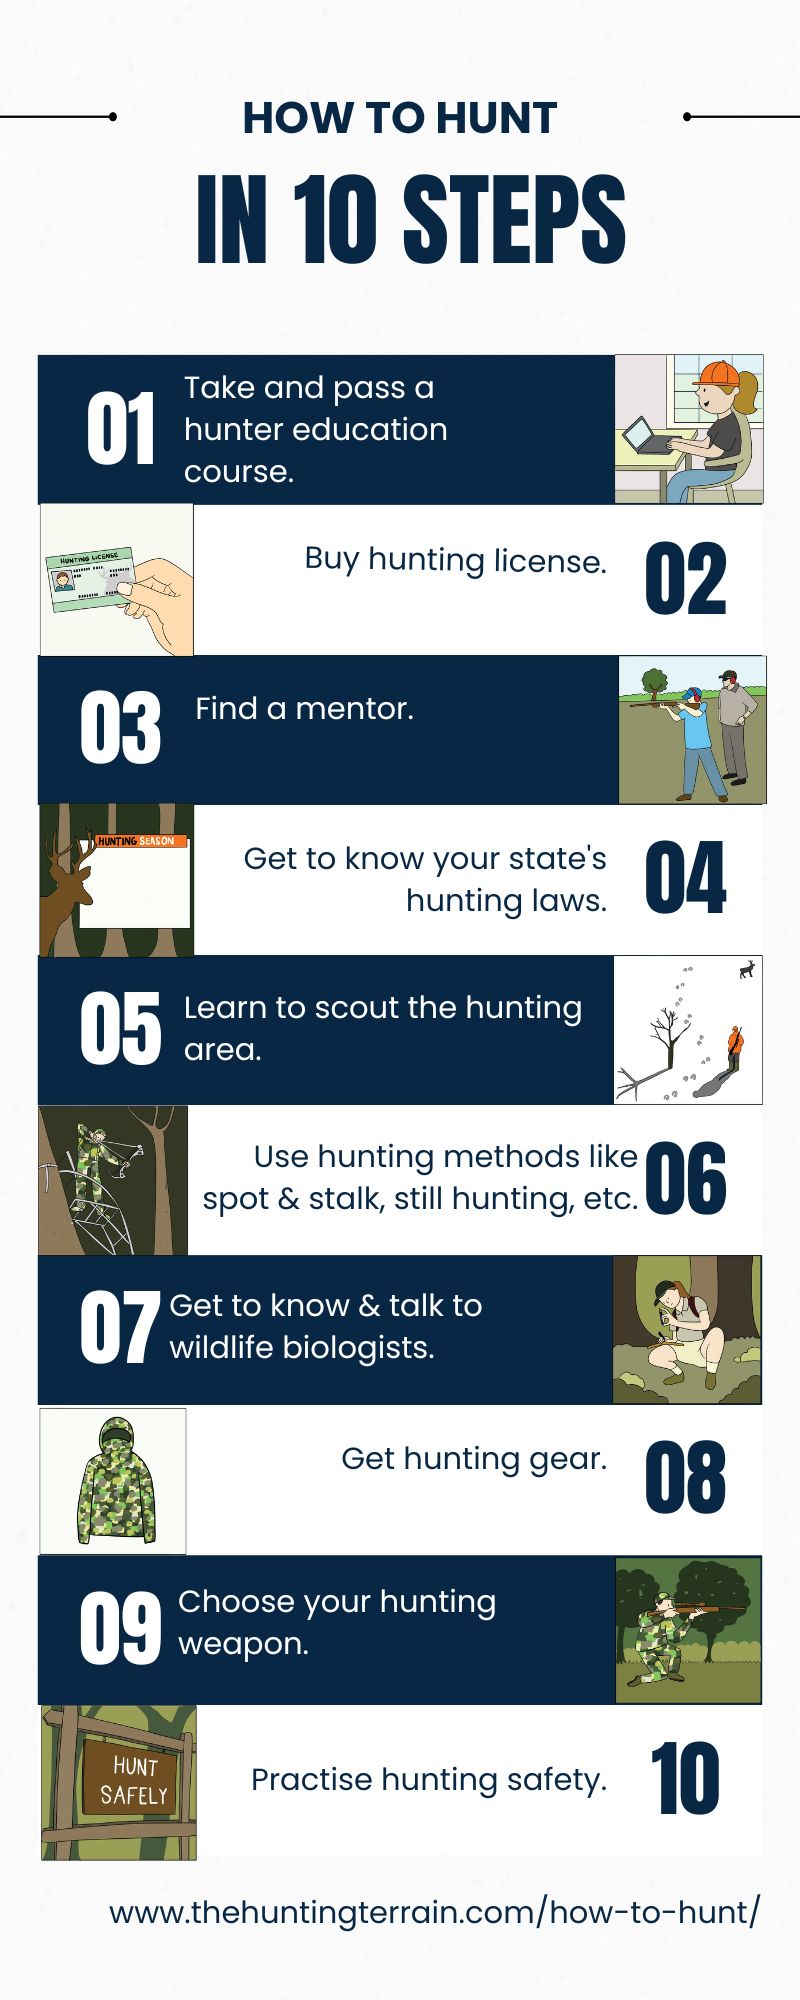 How-To-Hunt-infographic-plaza